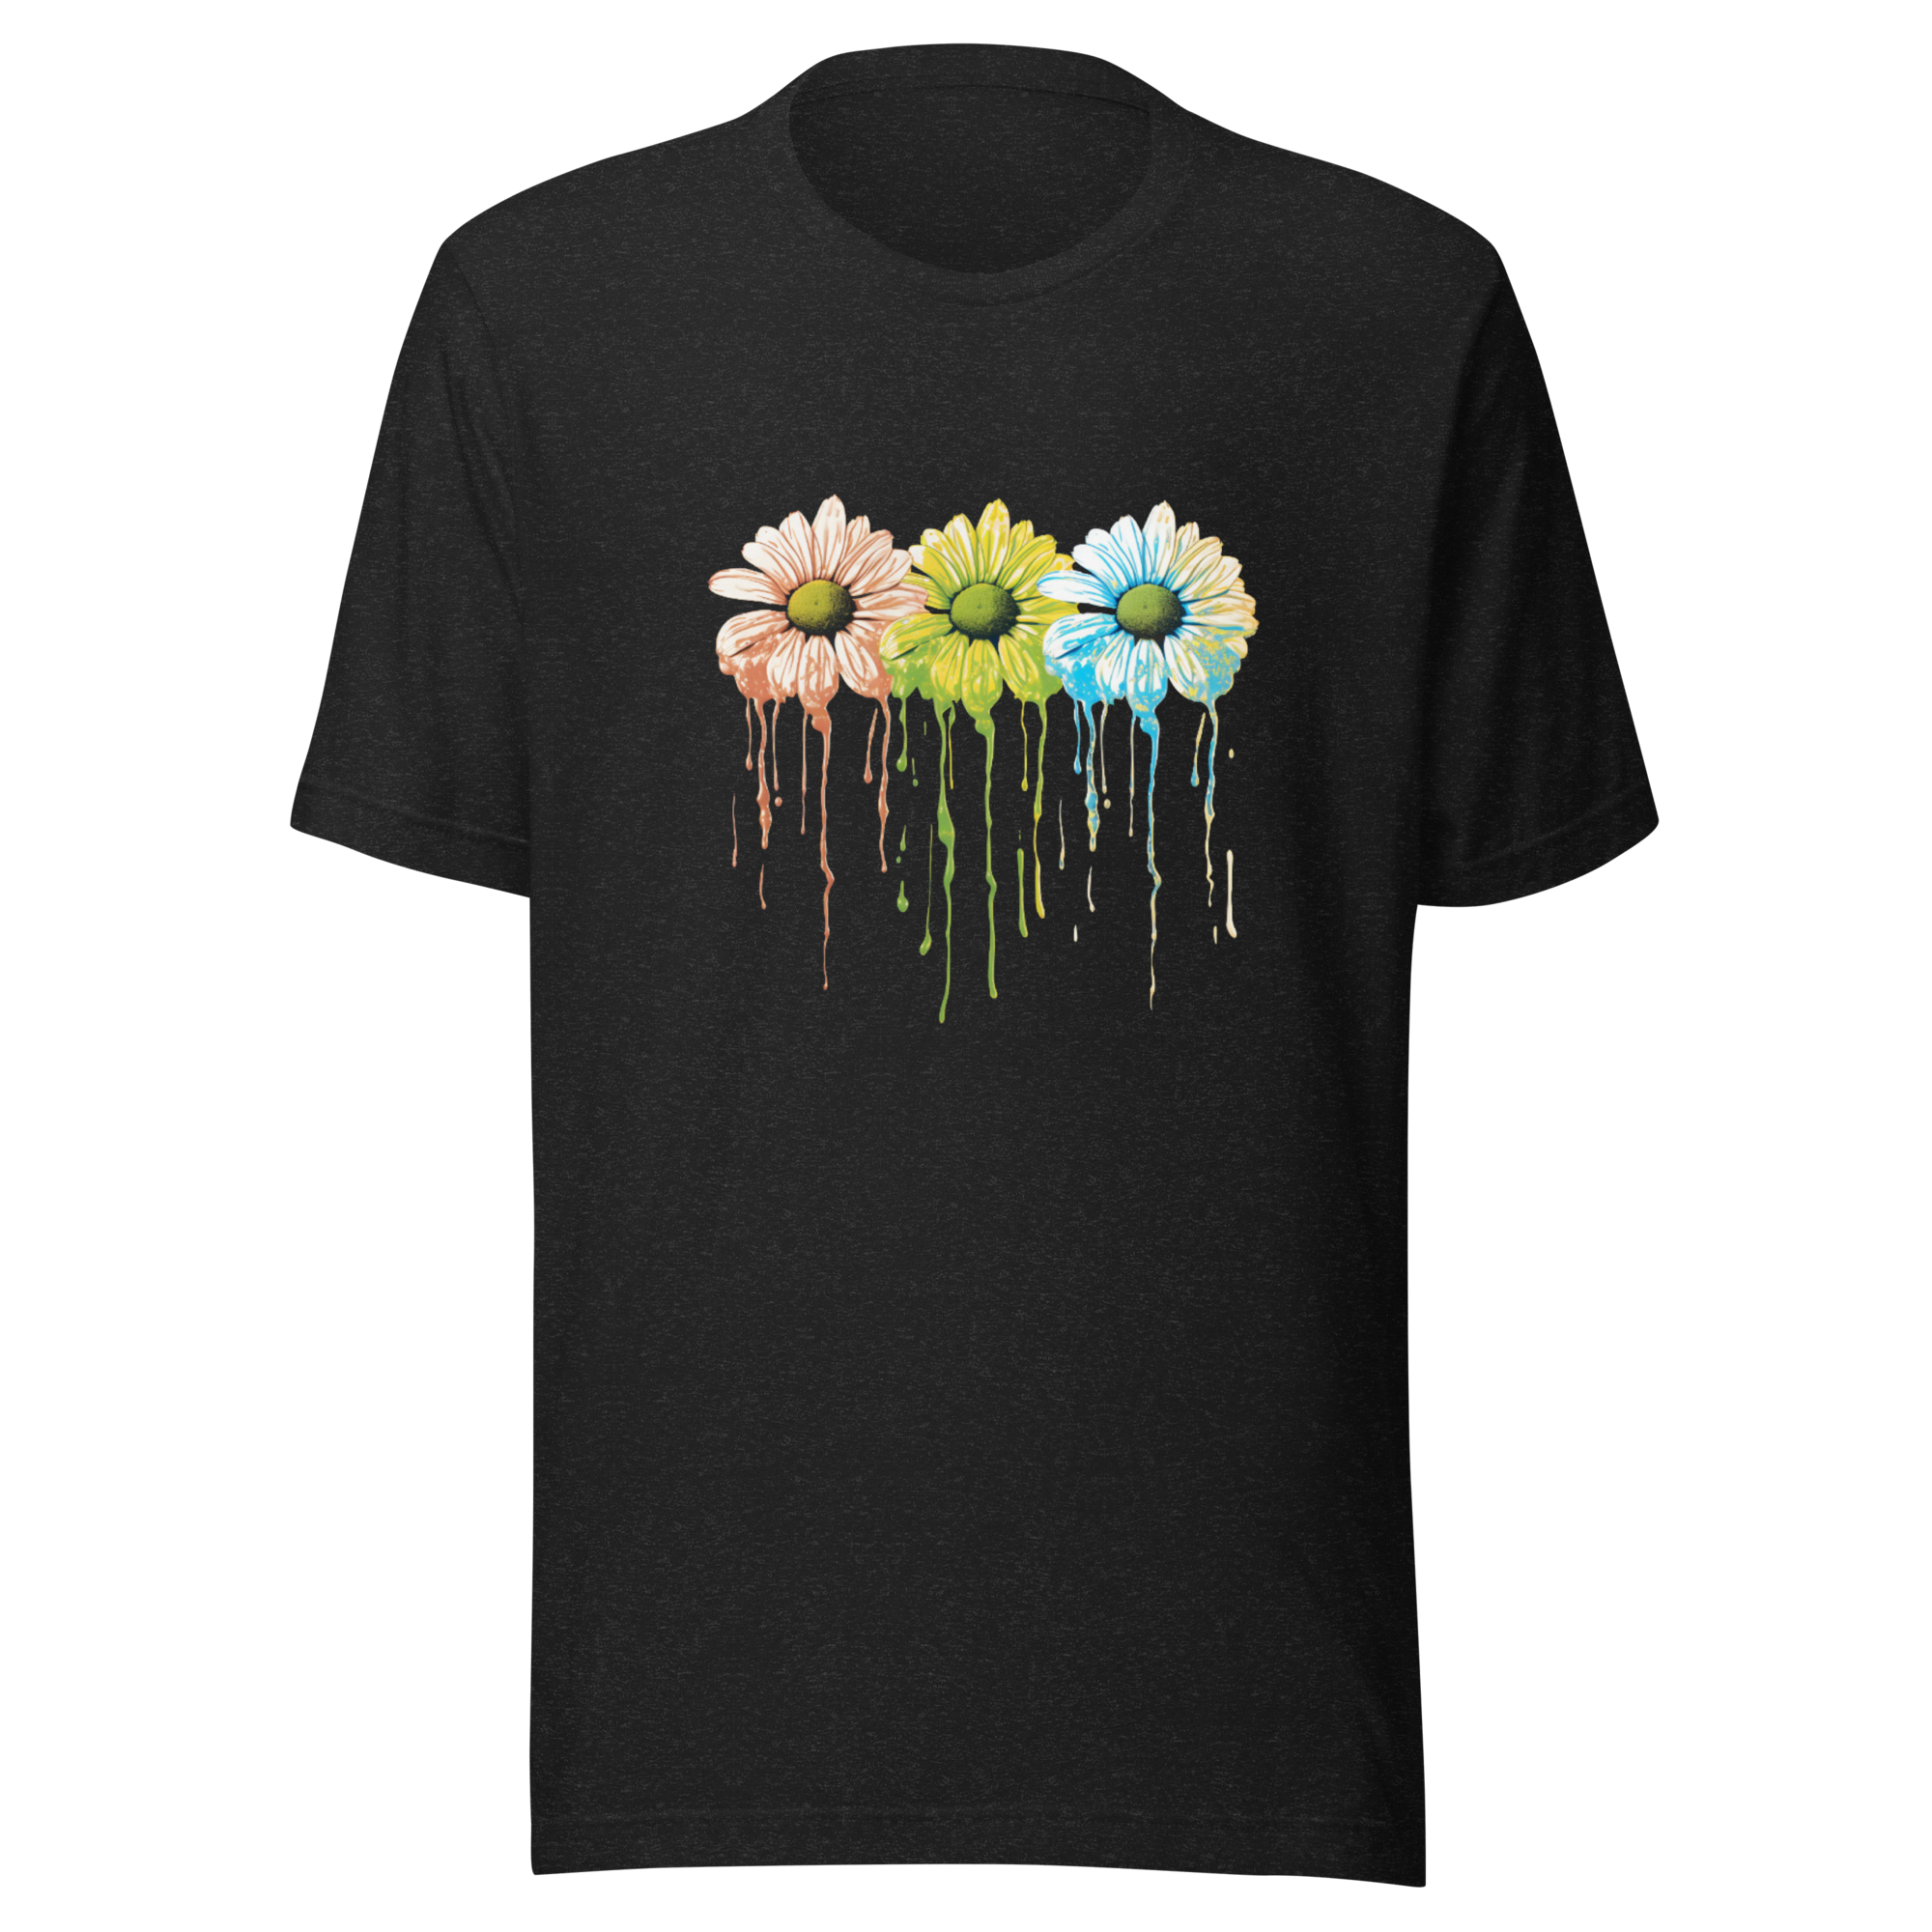 Black 3 Daisy T-Shirt Dripping Paint Red Yellow Blue